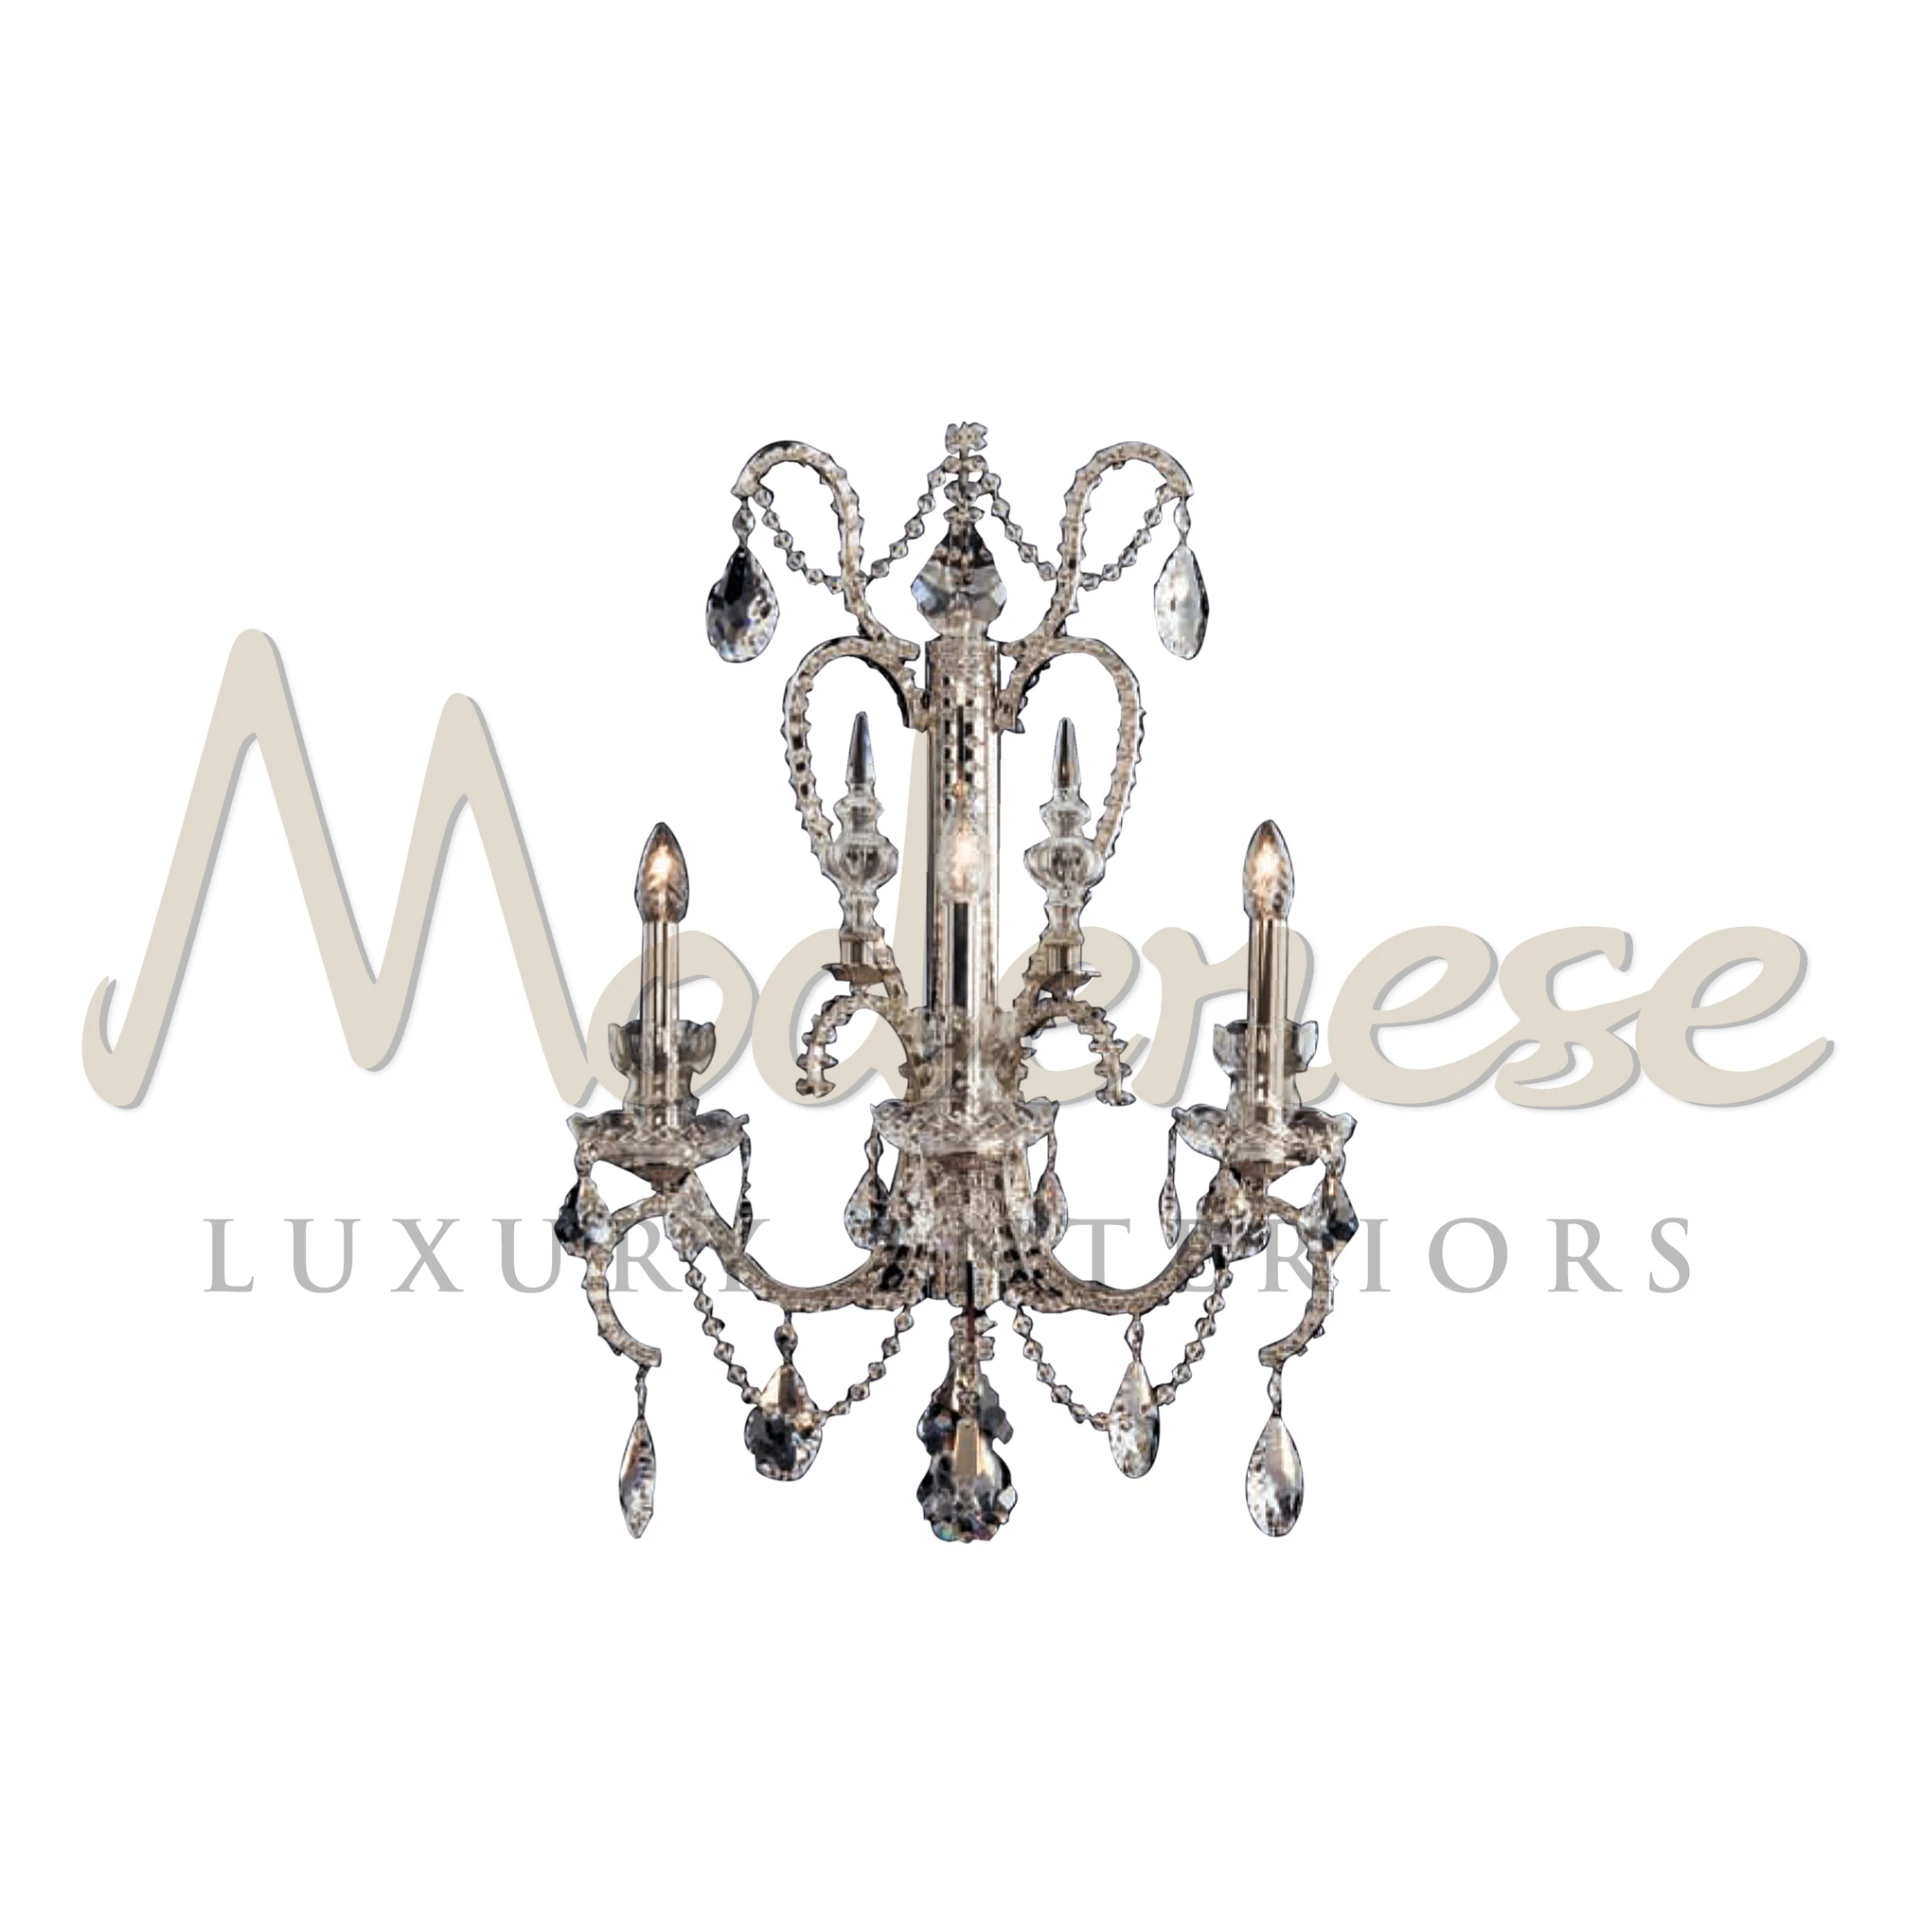 Silver Baroque Brilliance Sconce with delicate crystals and stylish bulb design